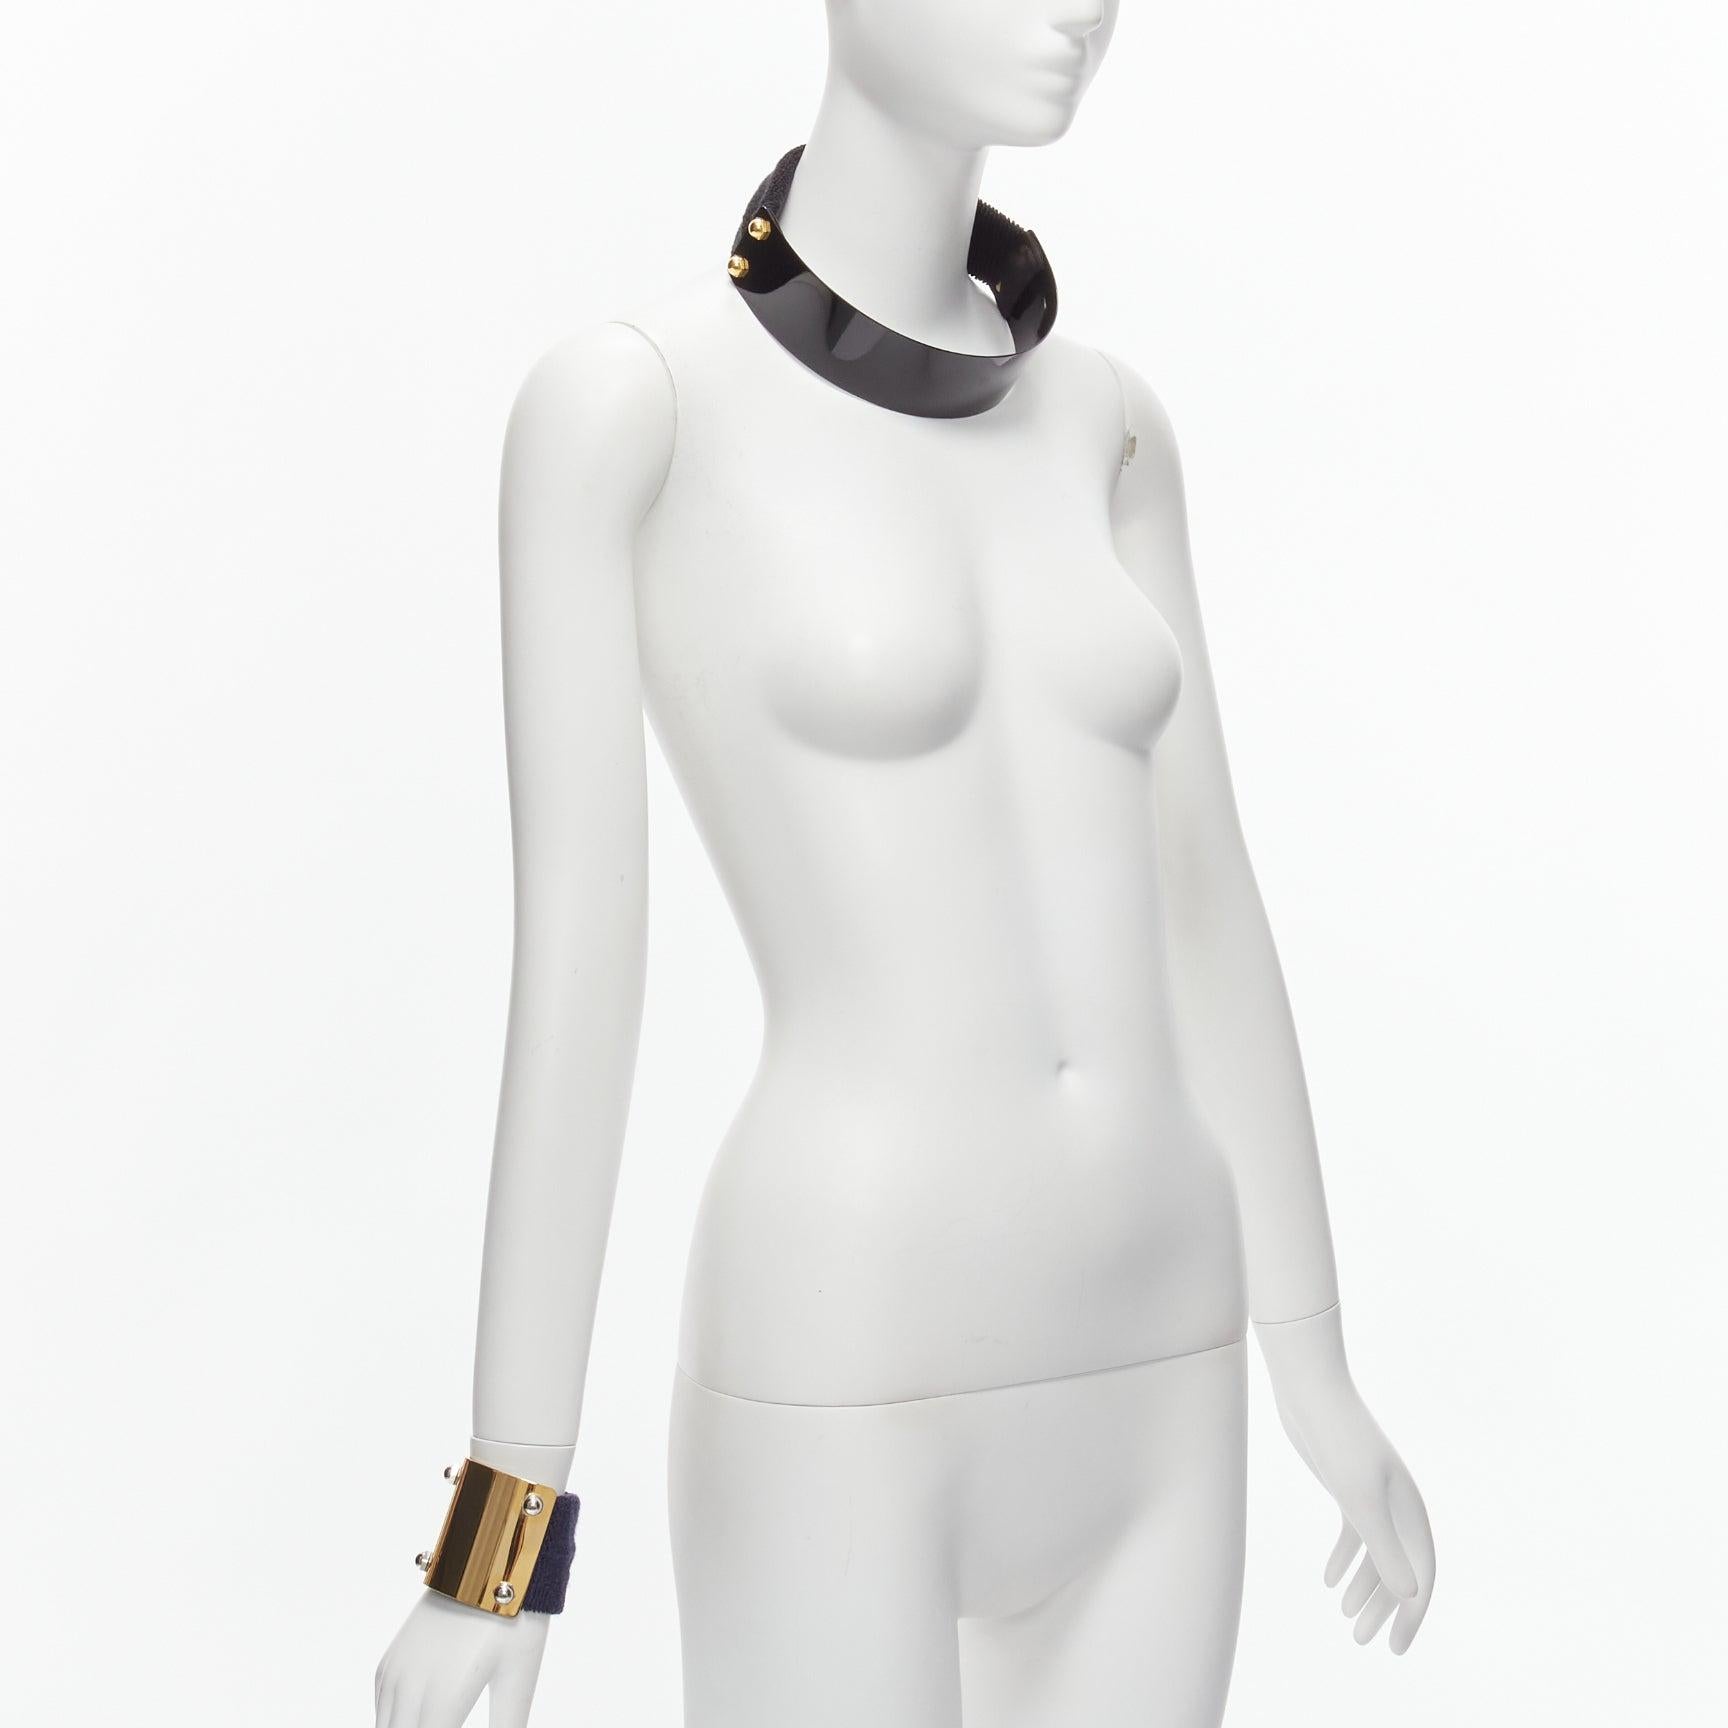 SACAI AMBUSH black gold navy metal studs terrycloth cuff XL choker set
Reference: BSHW/A00136
Brand: Sacai
Collection: Ambush
Material: Metal, Fabric
Color: Gold, Black
Pattern: Solid
Closure: Elasticated
Lining: Black Fabric
Extra Details: Cuff is